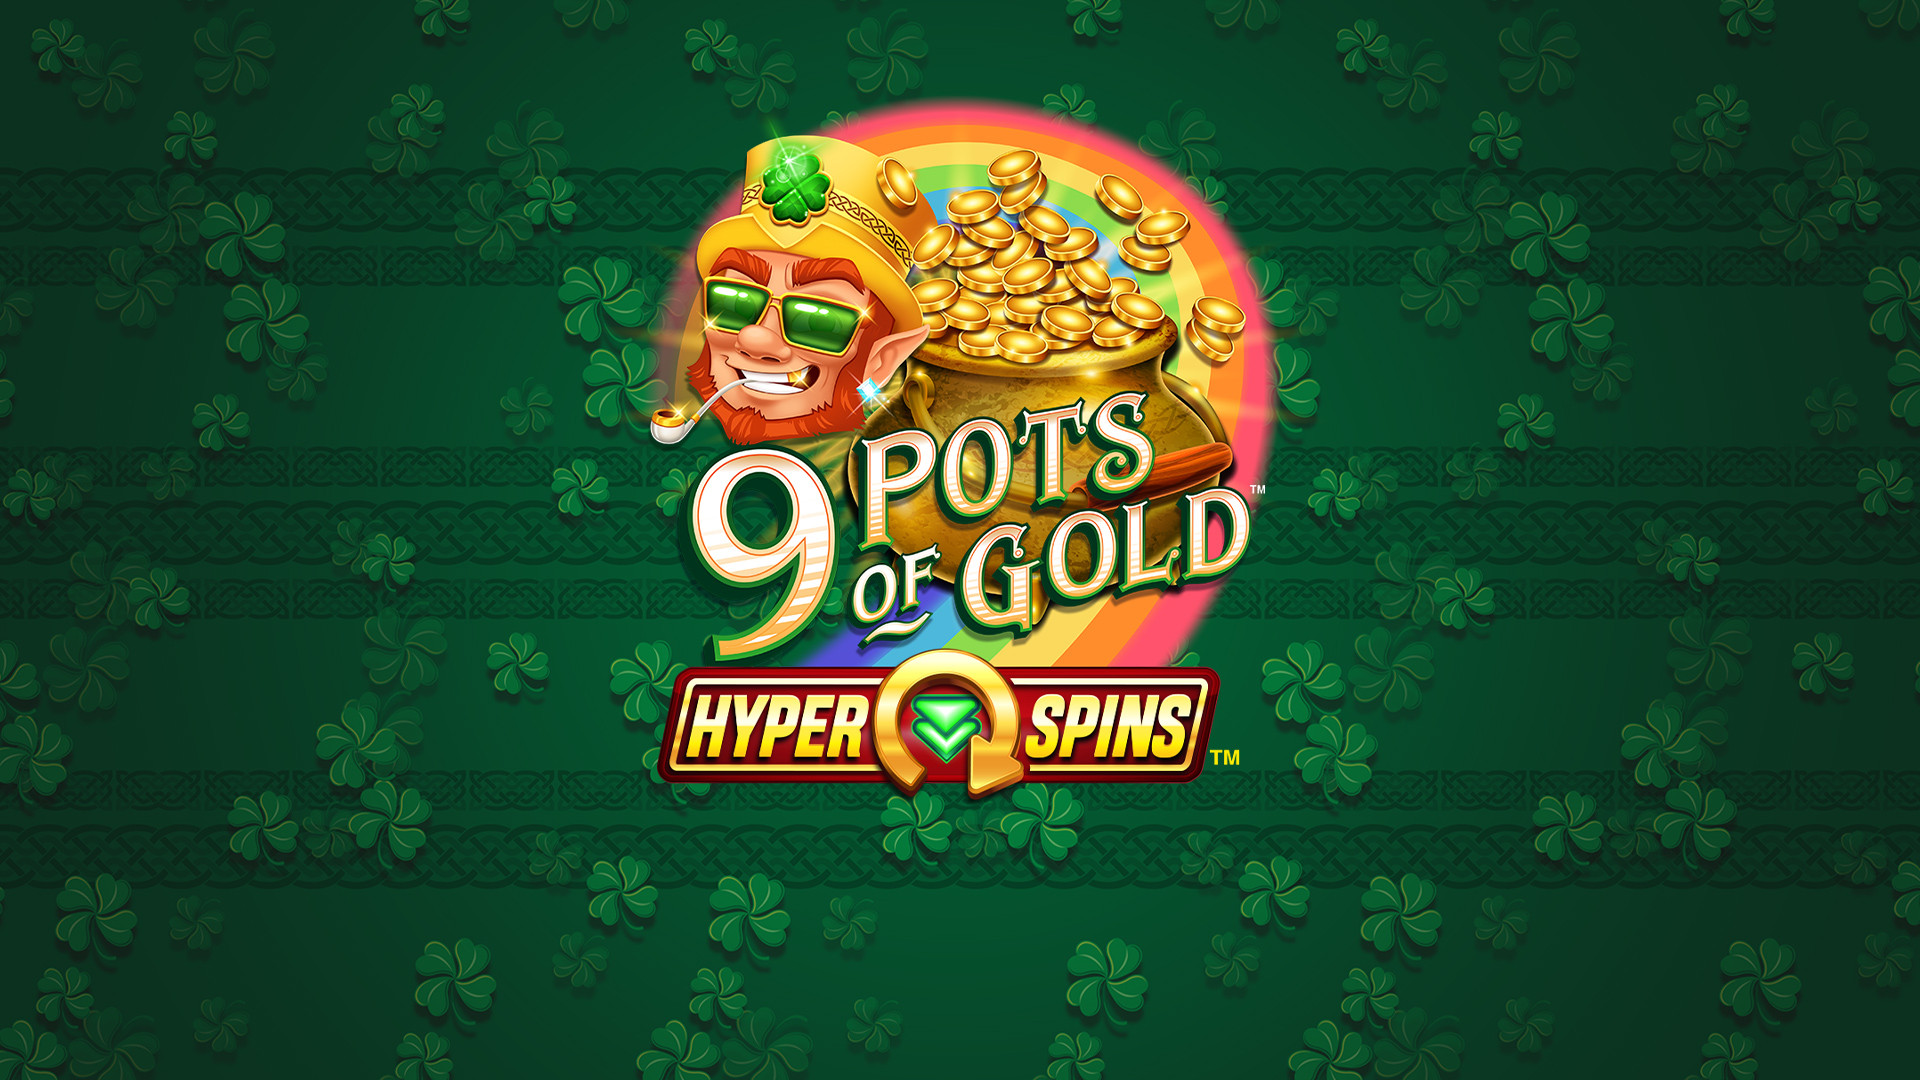 9 Pots of Gold: HyperSpins